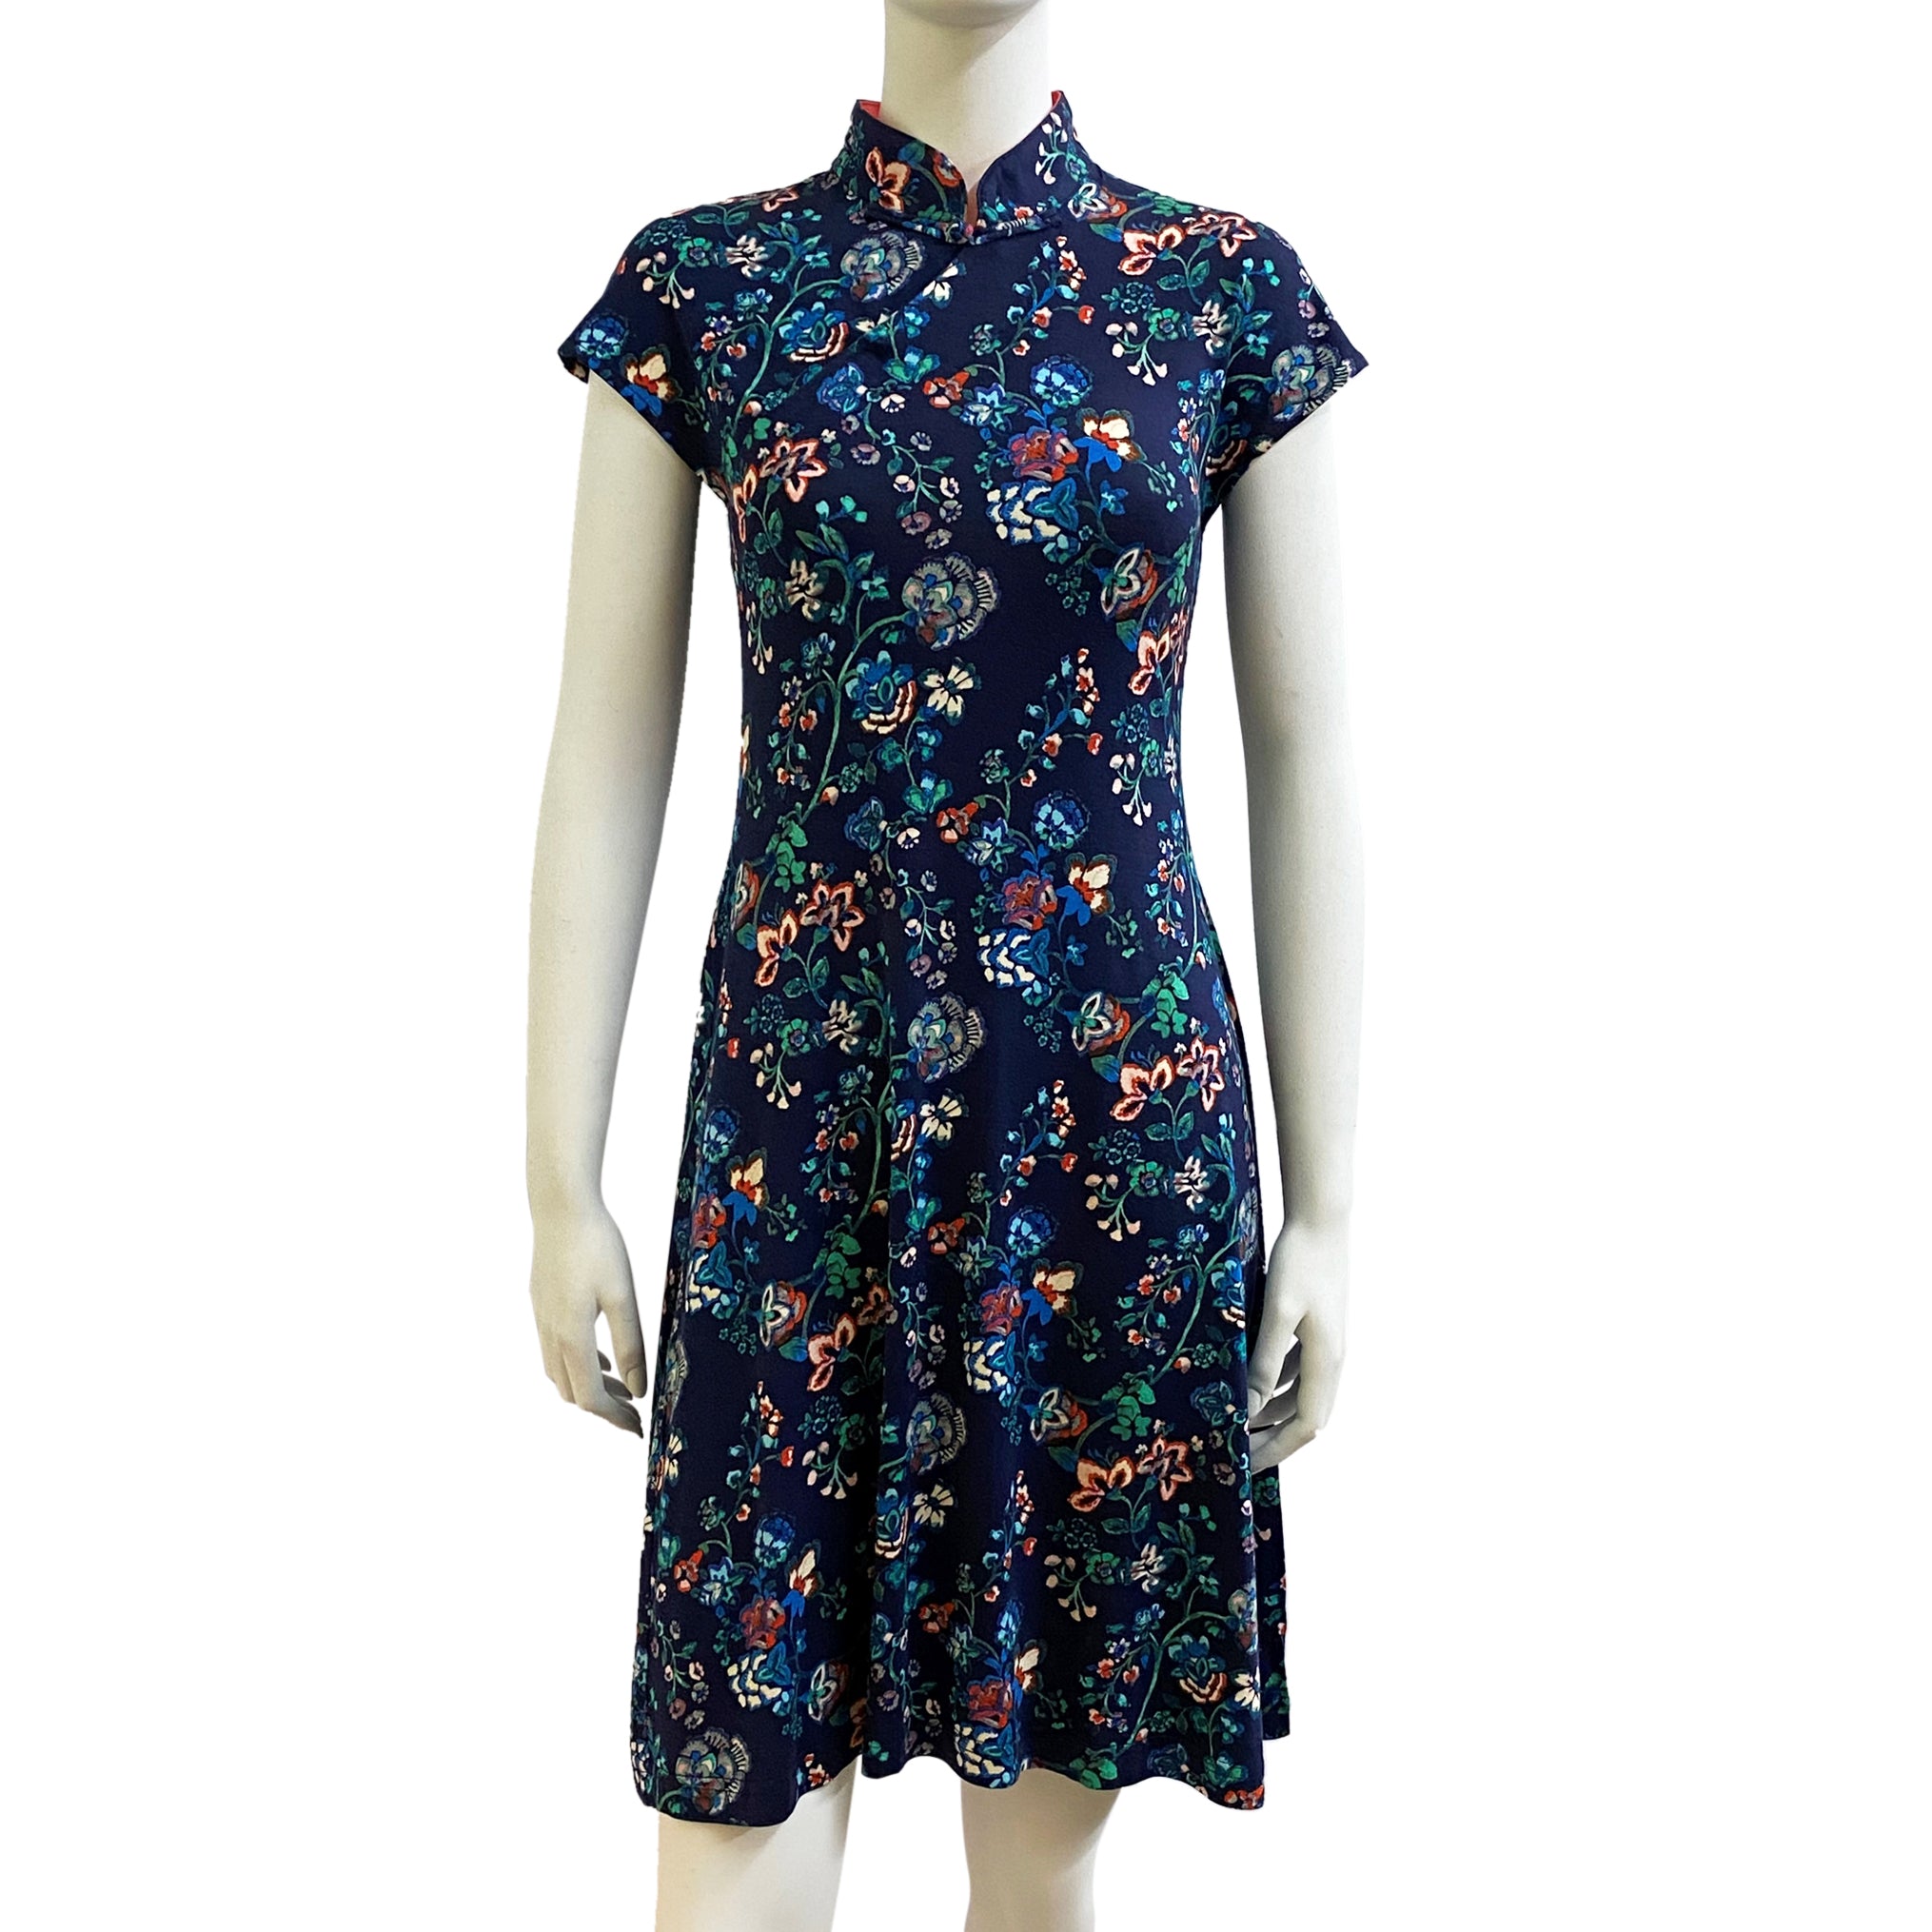 Goods Of Desire Blue/Green Spring Floral Printed Qipao Dress